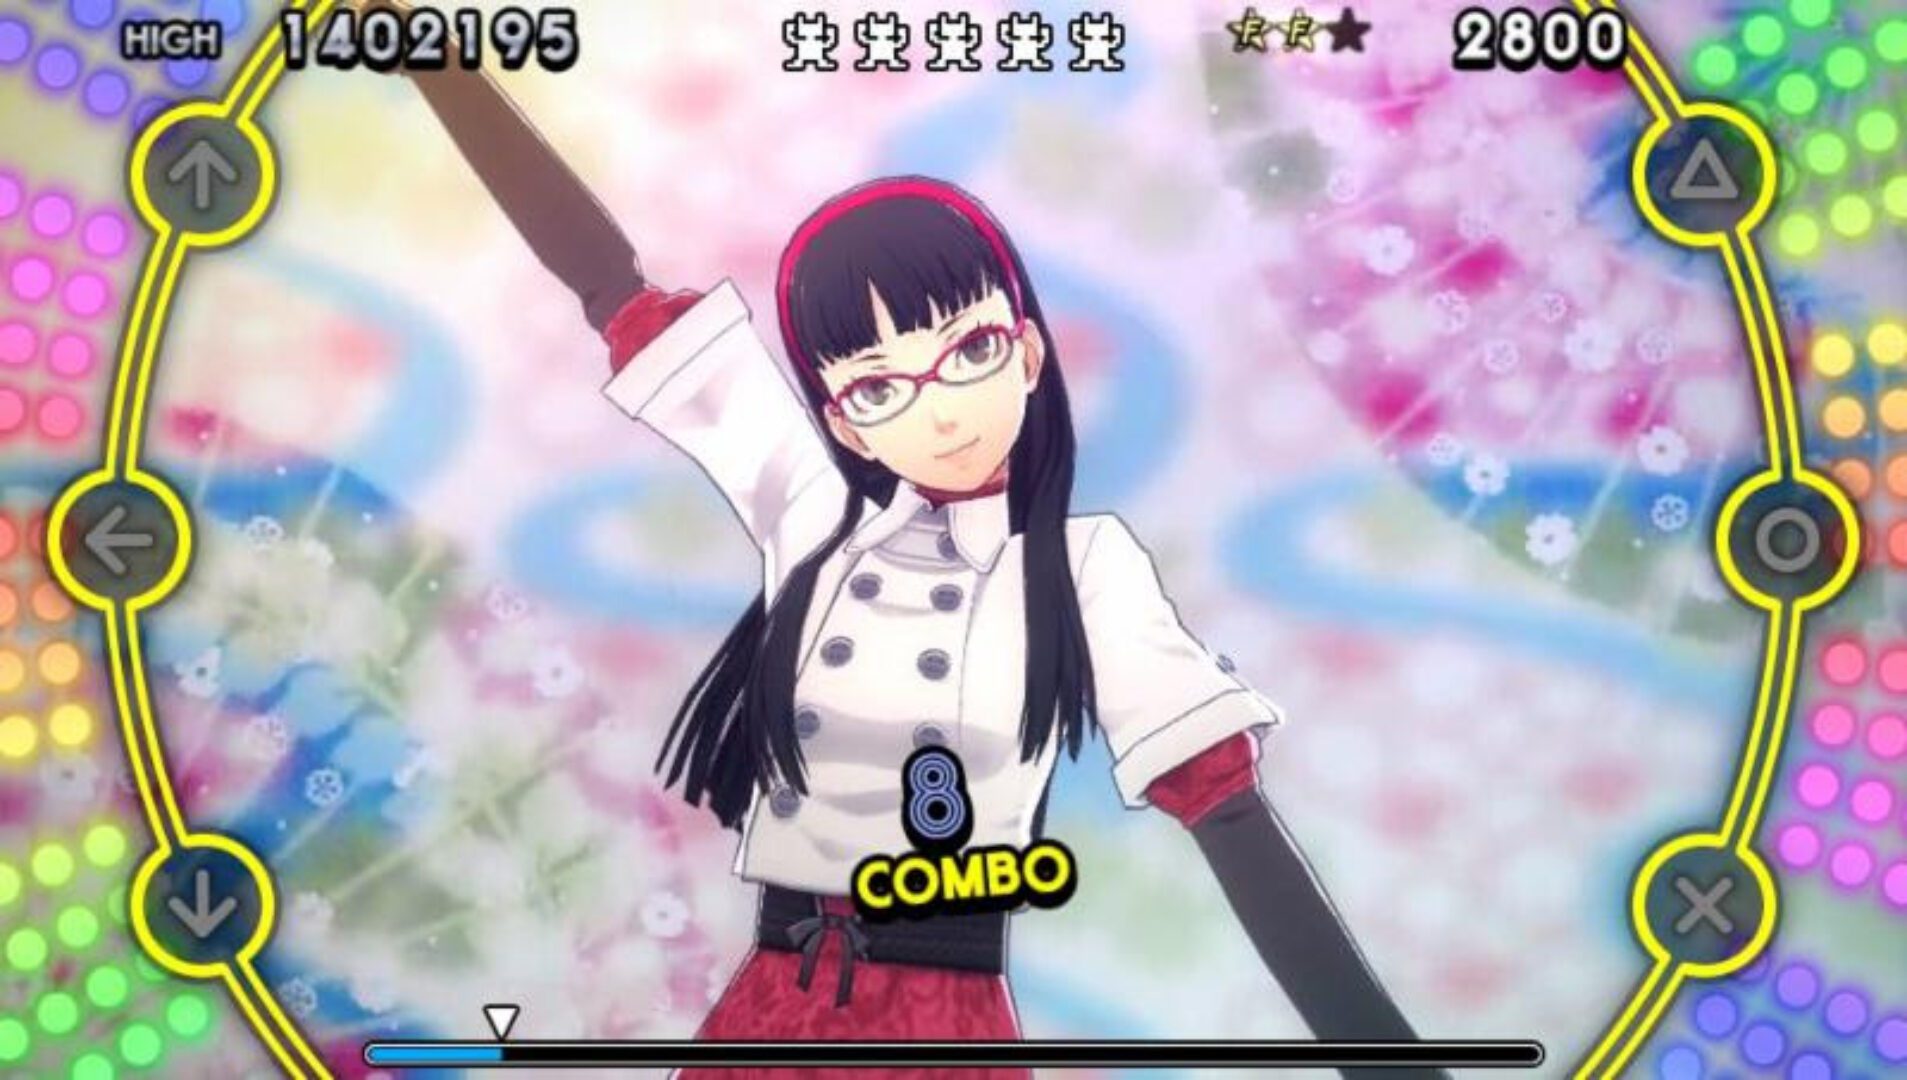 New Video/Screenshots and Free Launch DLC for Persona 4: Dancing All Night